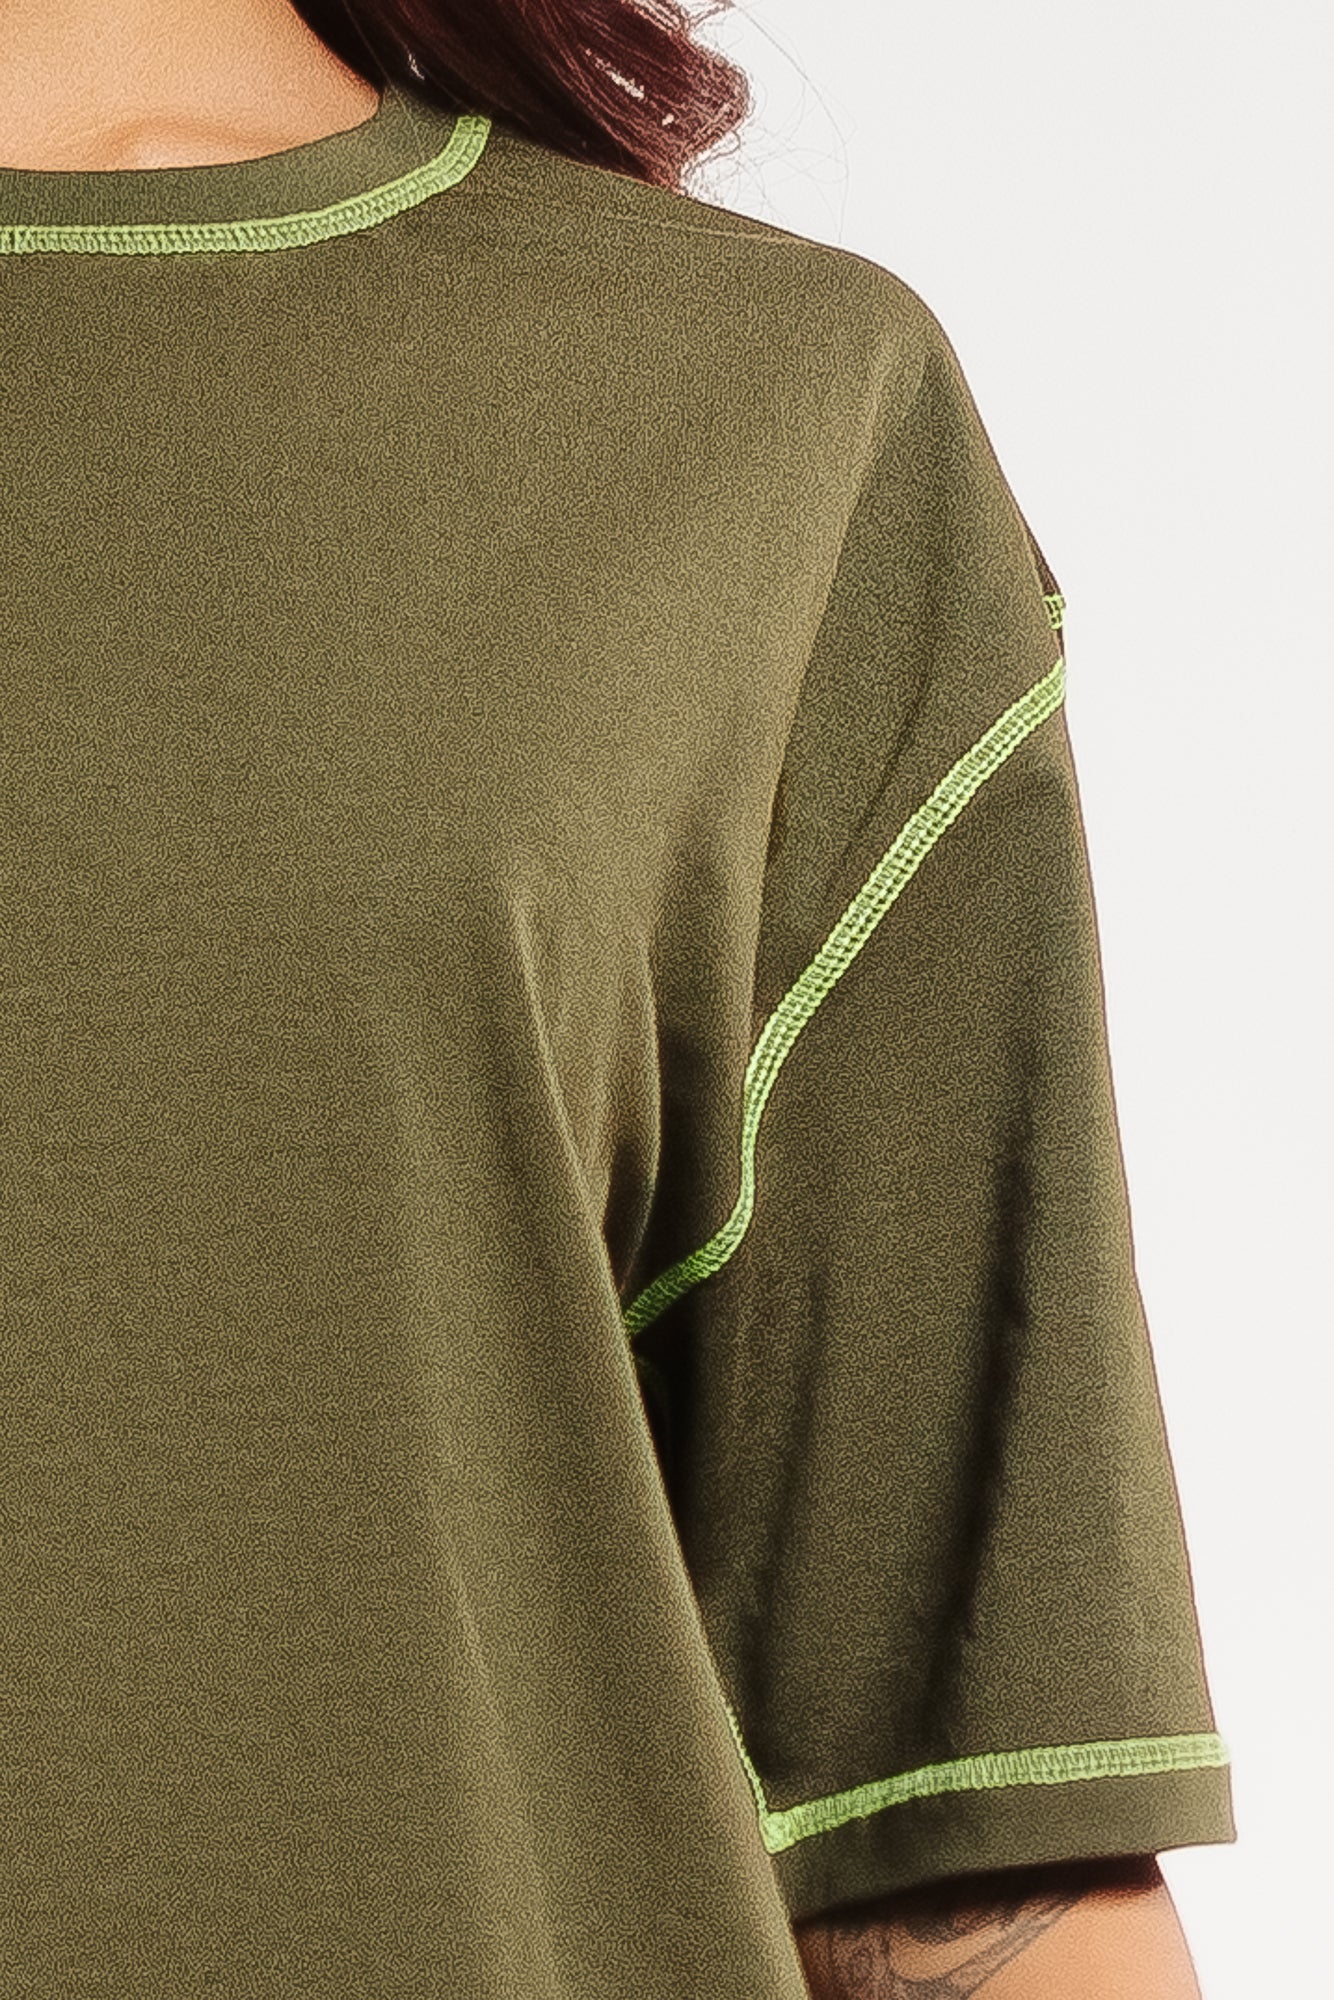 OLIVE TOPSTITCHED OVERSIZED TEES